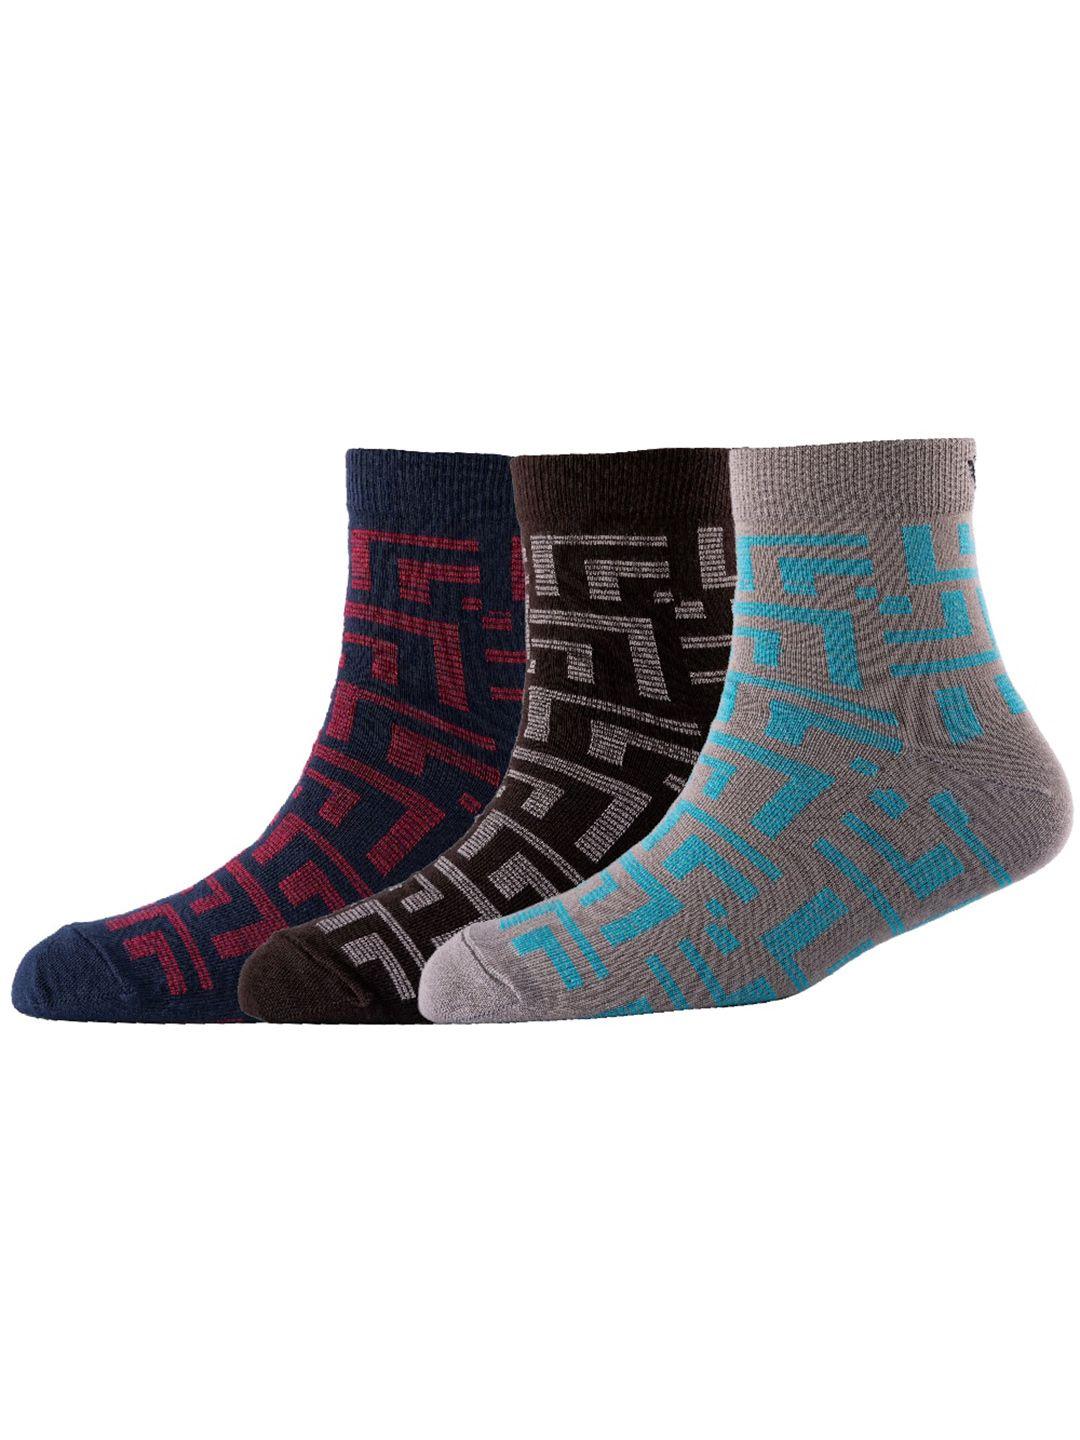 cotstyle-men-pack-of-3-patterned-pure-cotton-above-ankle-socks